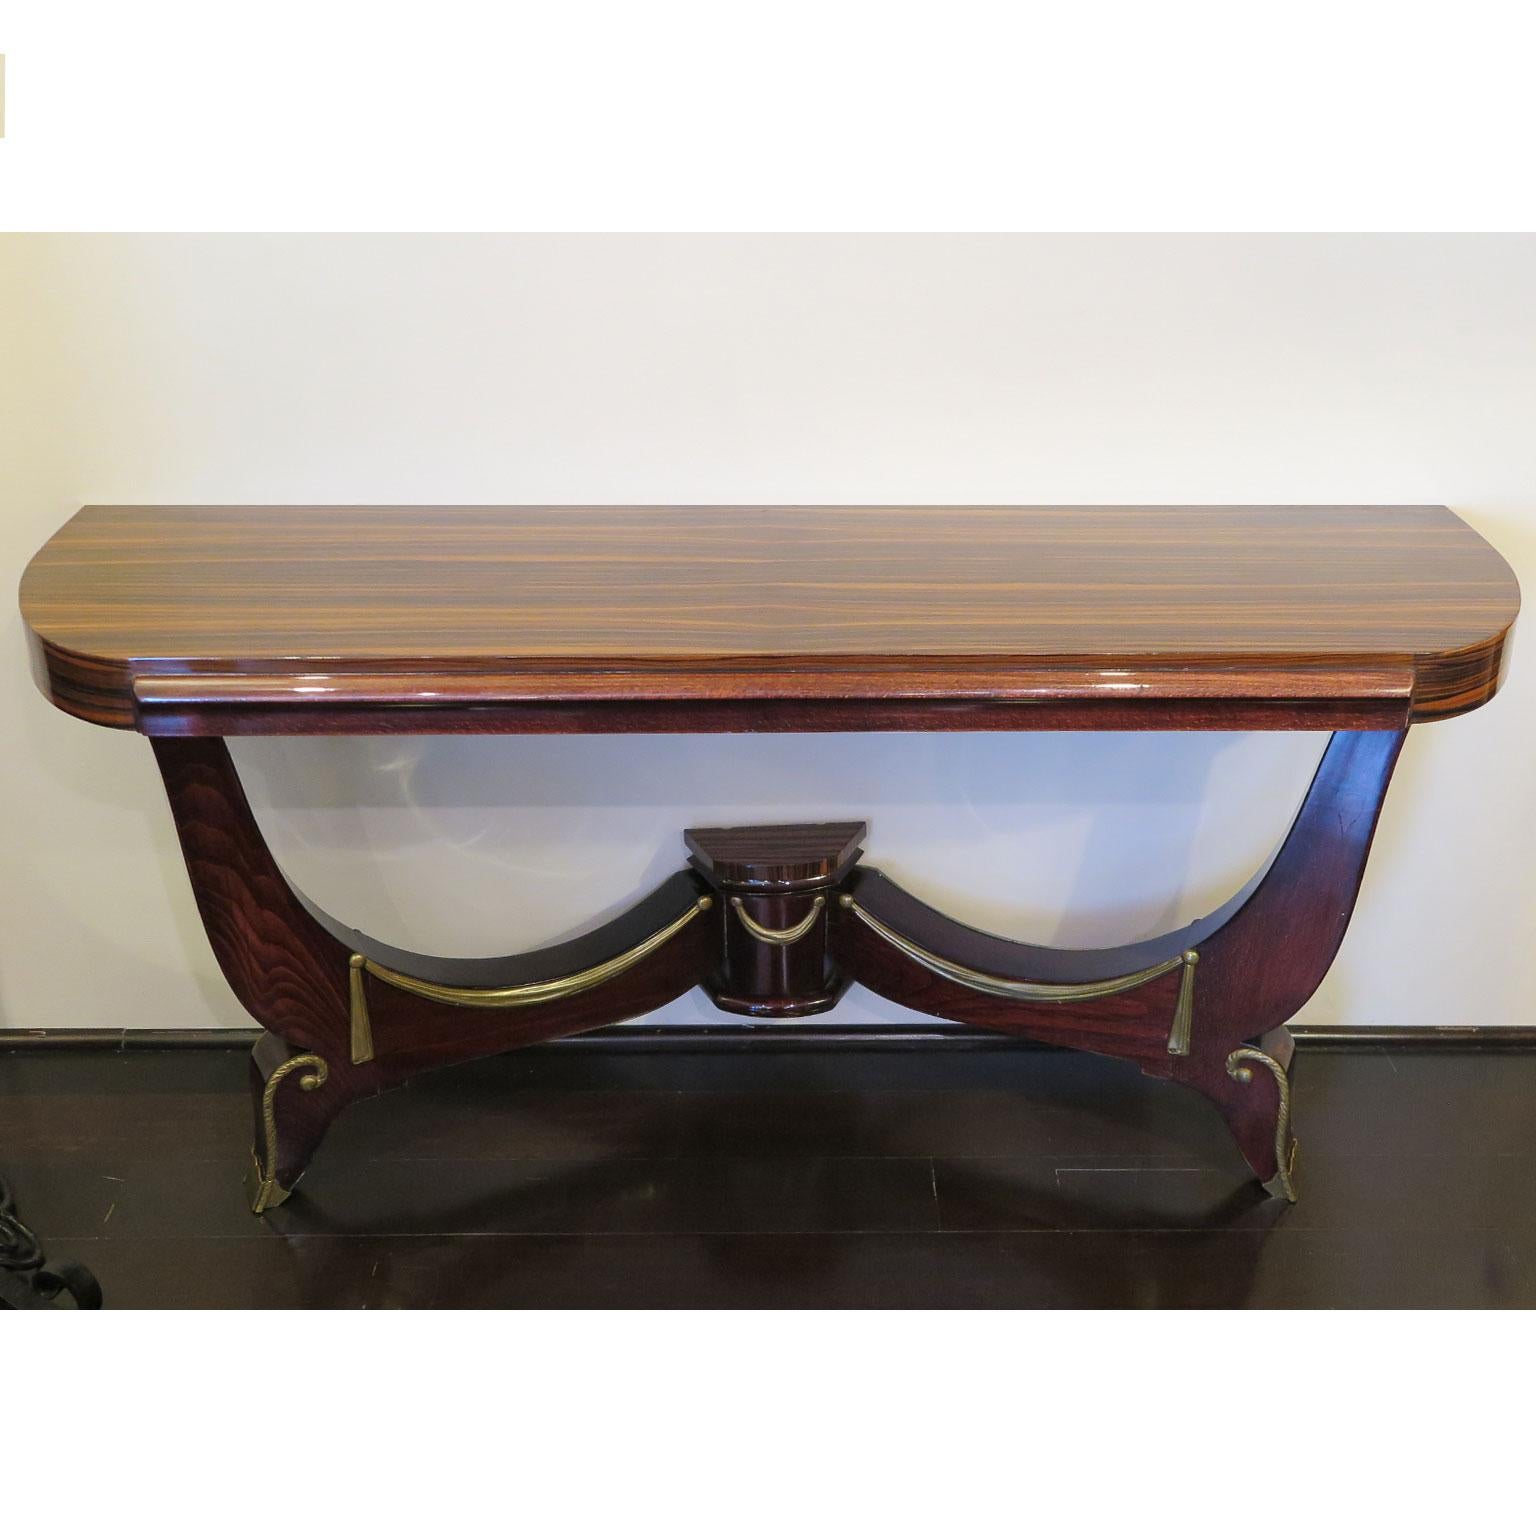 Classic Art Deco console showcases a demilune top. The top and base detail is done in Macassar while the curved legs and front apron are in a Mahogany. The curved base features brass details in the style of tassels and swirl details on the feet with